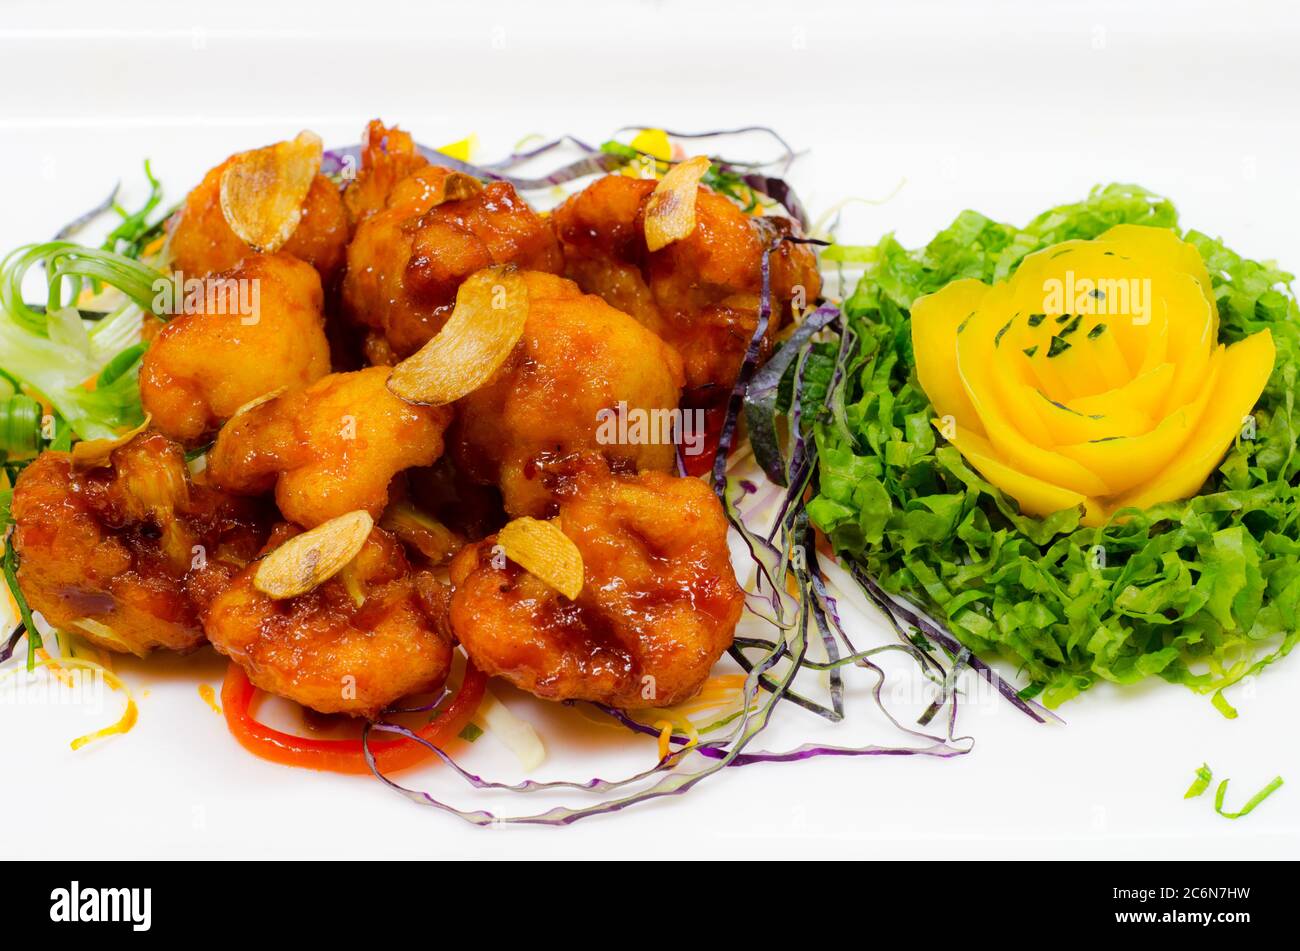 Tasty food with great presentation Stock Photo